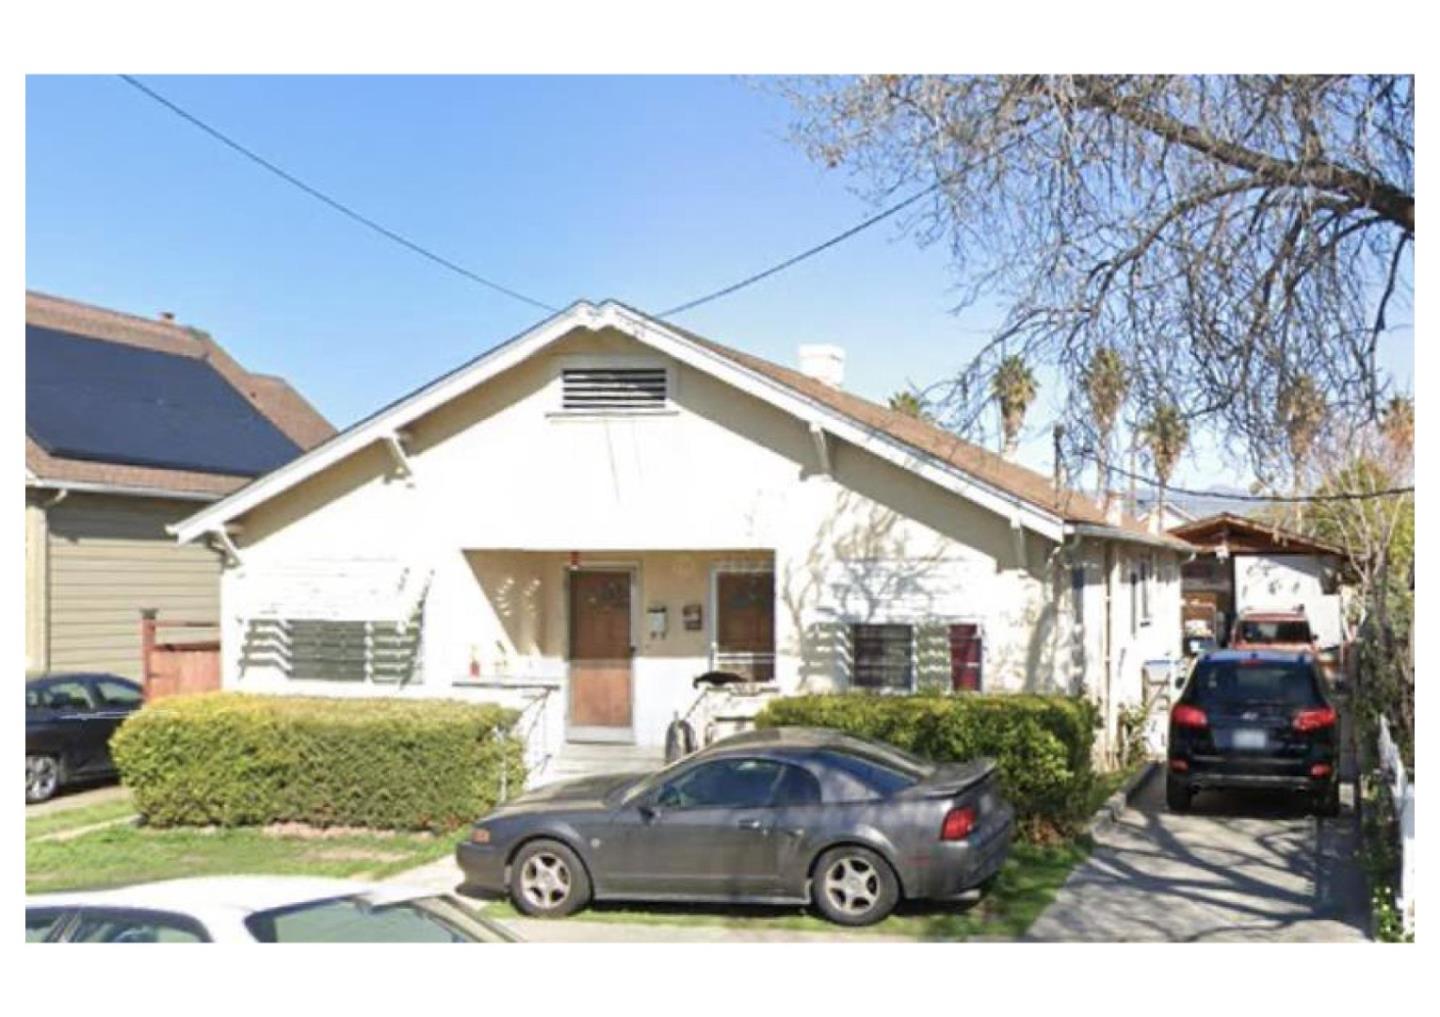 Photo of 966 S 6th St in San Jose, CA